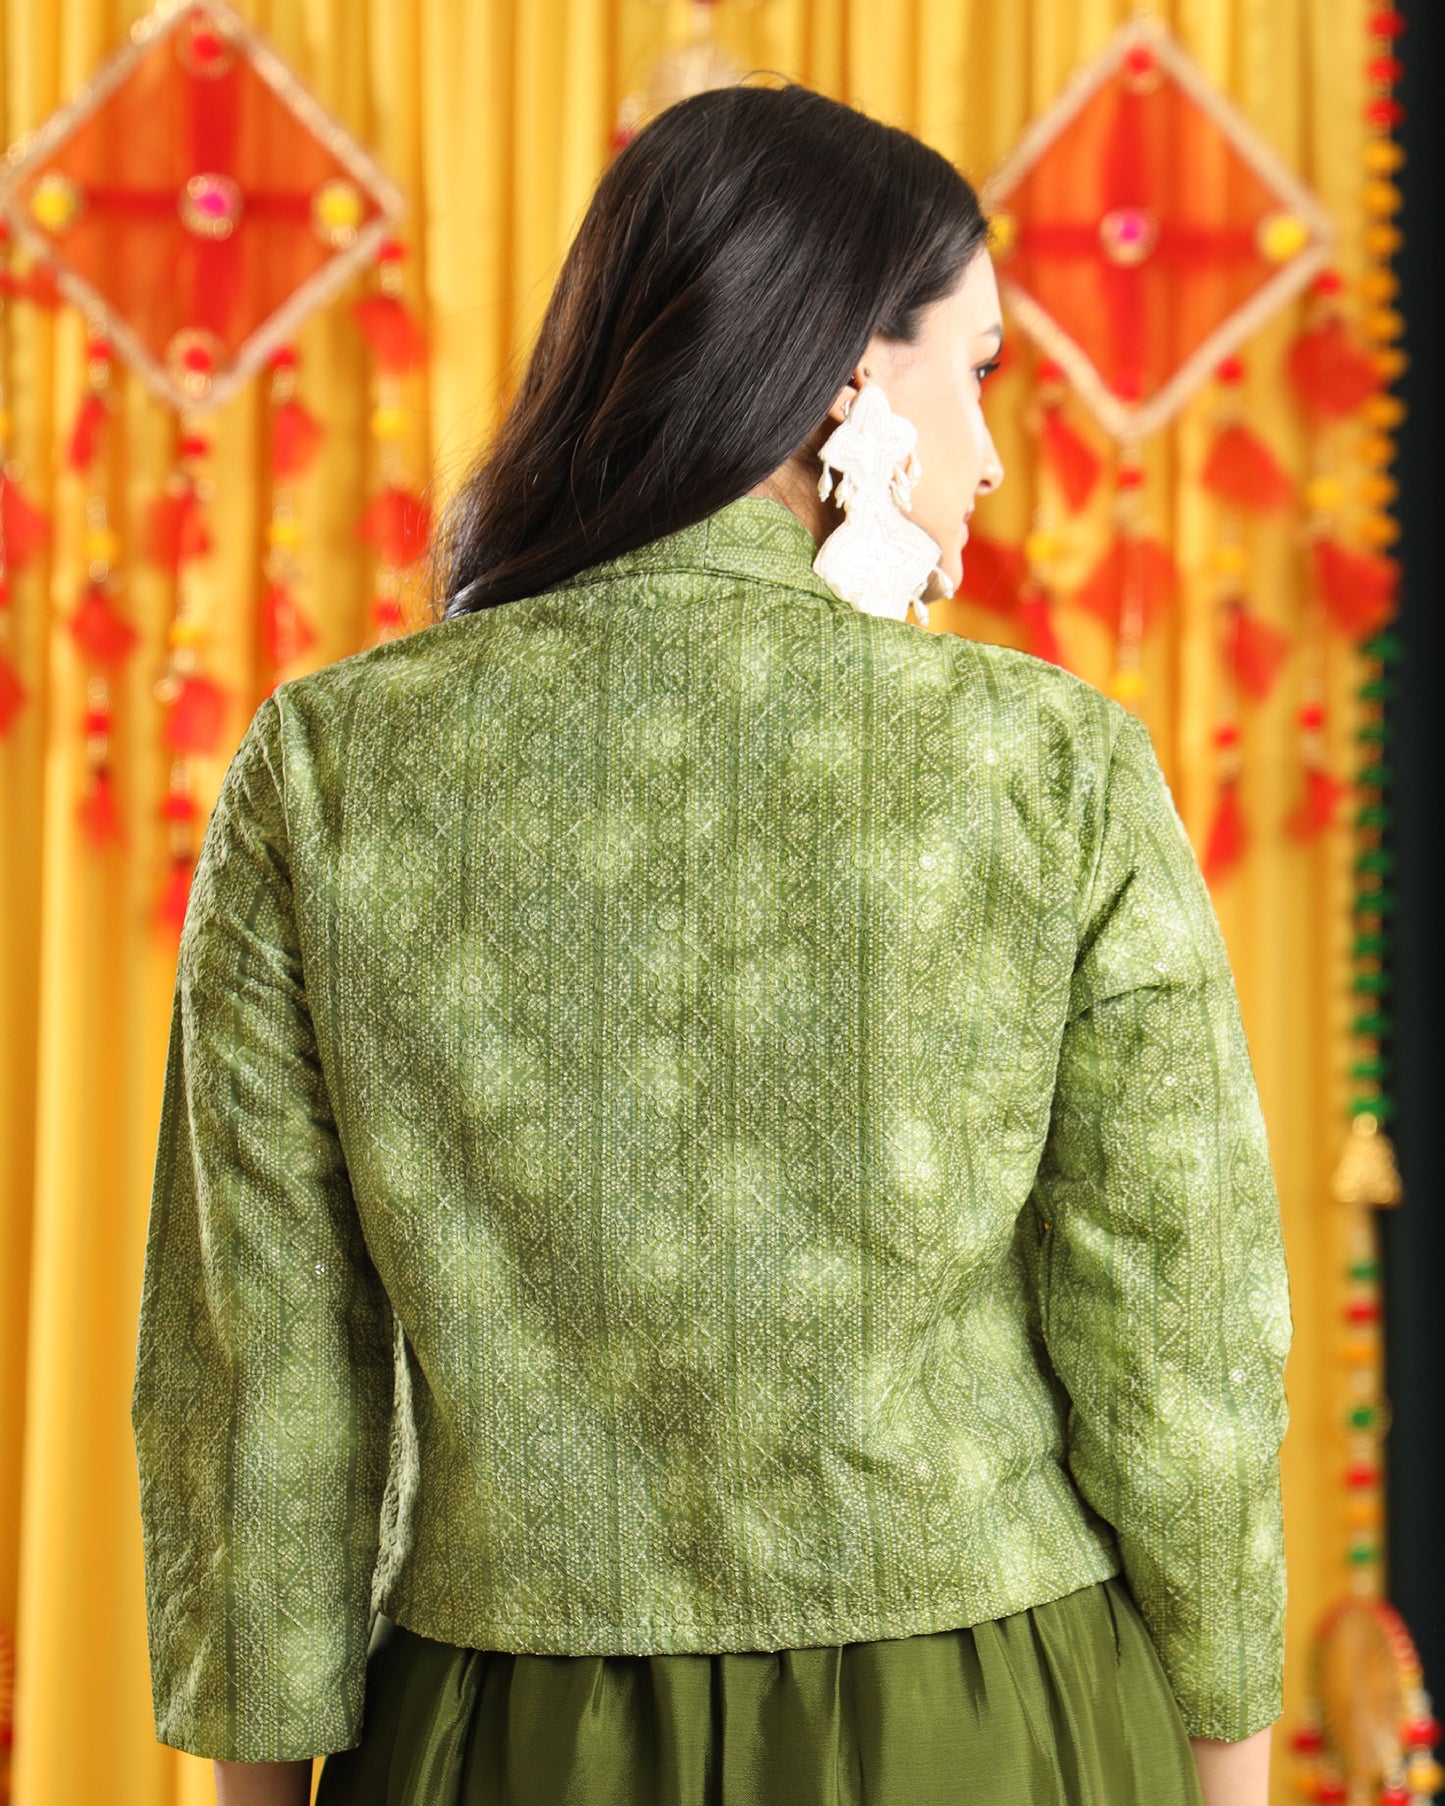 Perfect Pairing: Embroidered Jacket For Every Occasion